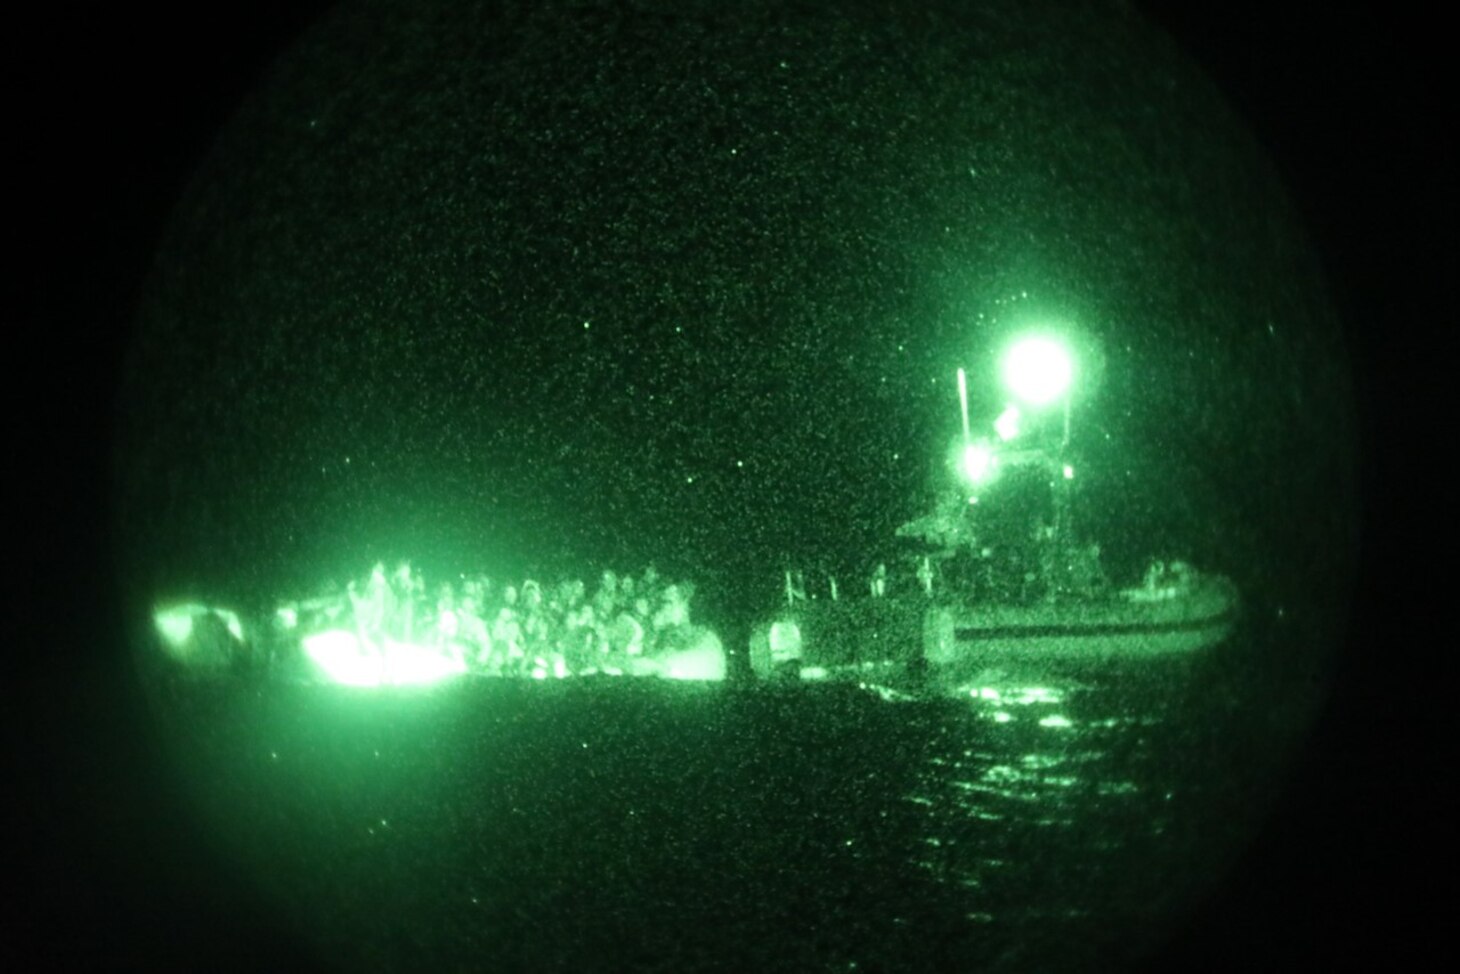 The crew of the Sentinel-class USCGC Glen Harris (WPC 1145) aboard a small boat assess an overloaded raft taking on water carrying migrants in the Atlantic Ocean prior to their subsequent rescue Jan. 5, 2021.